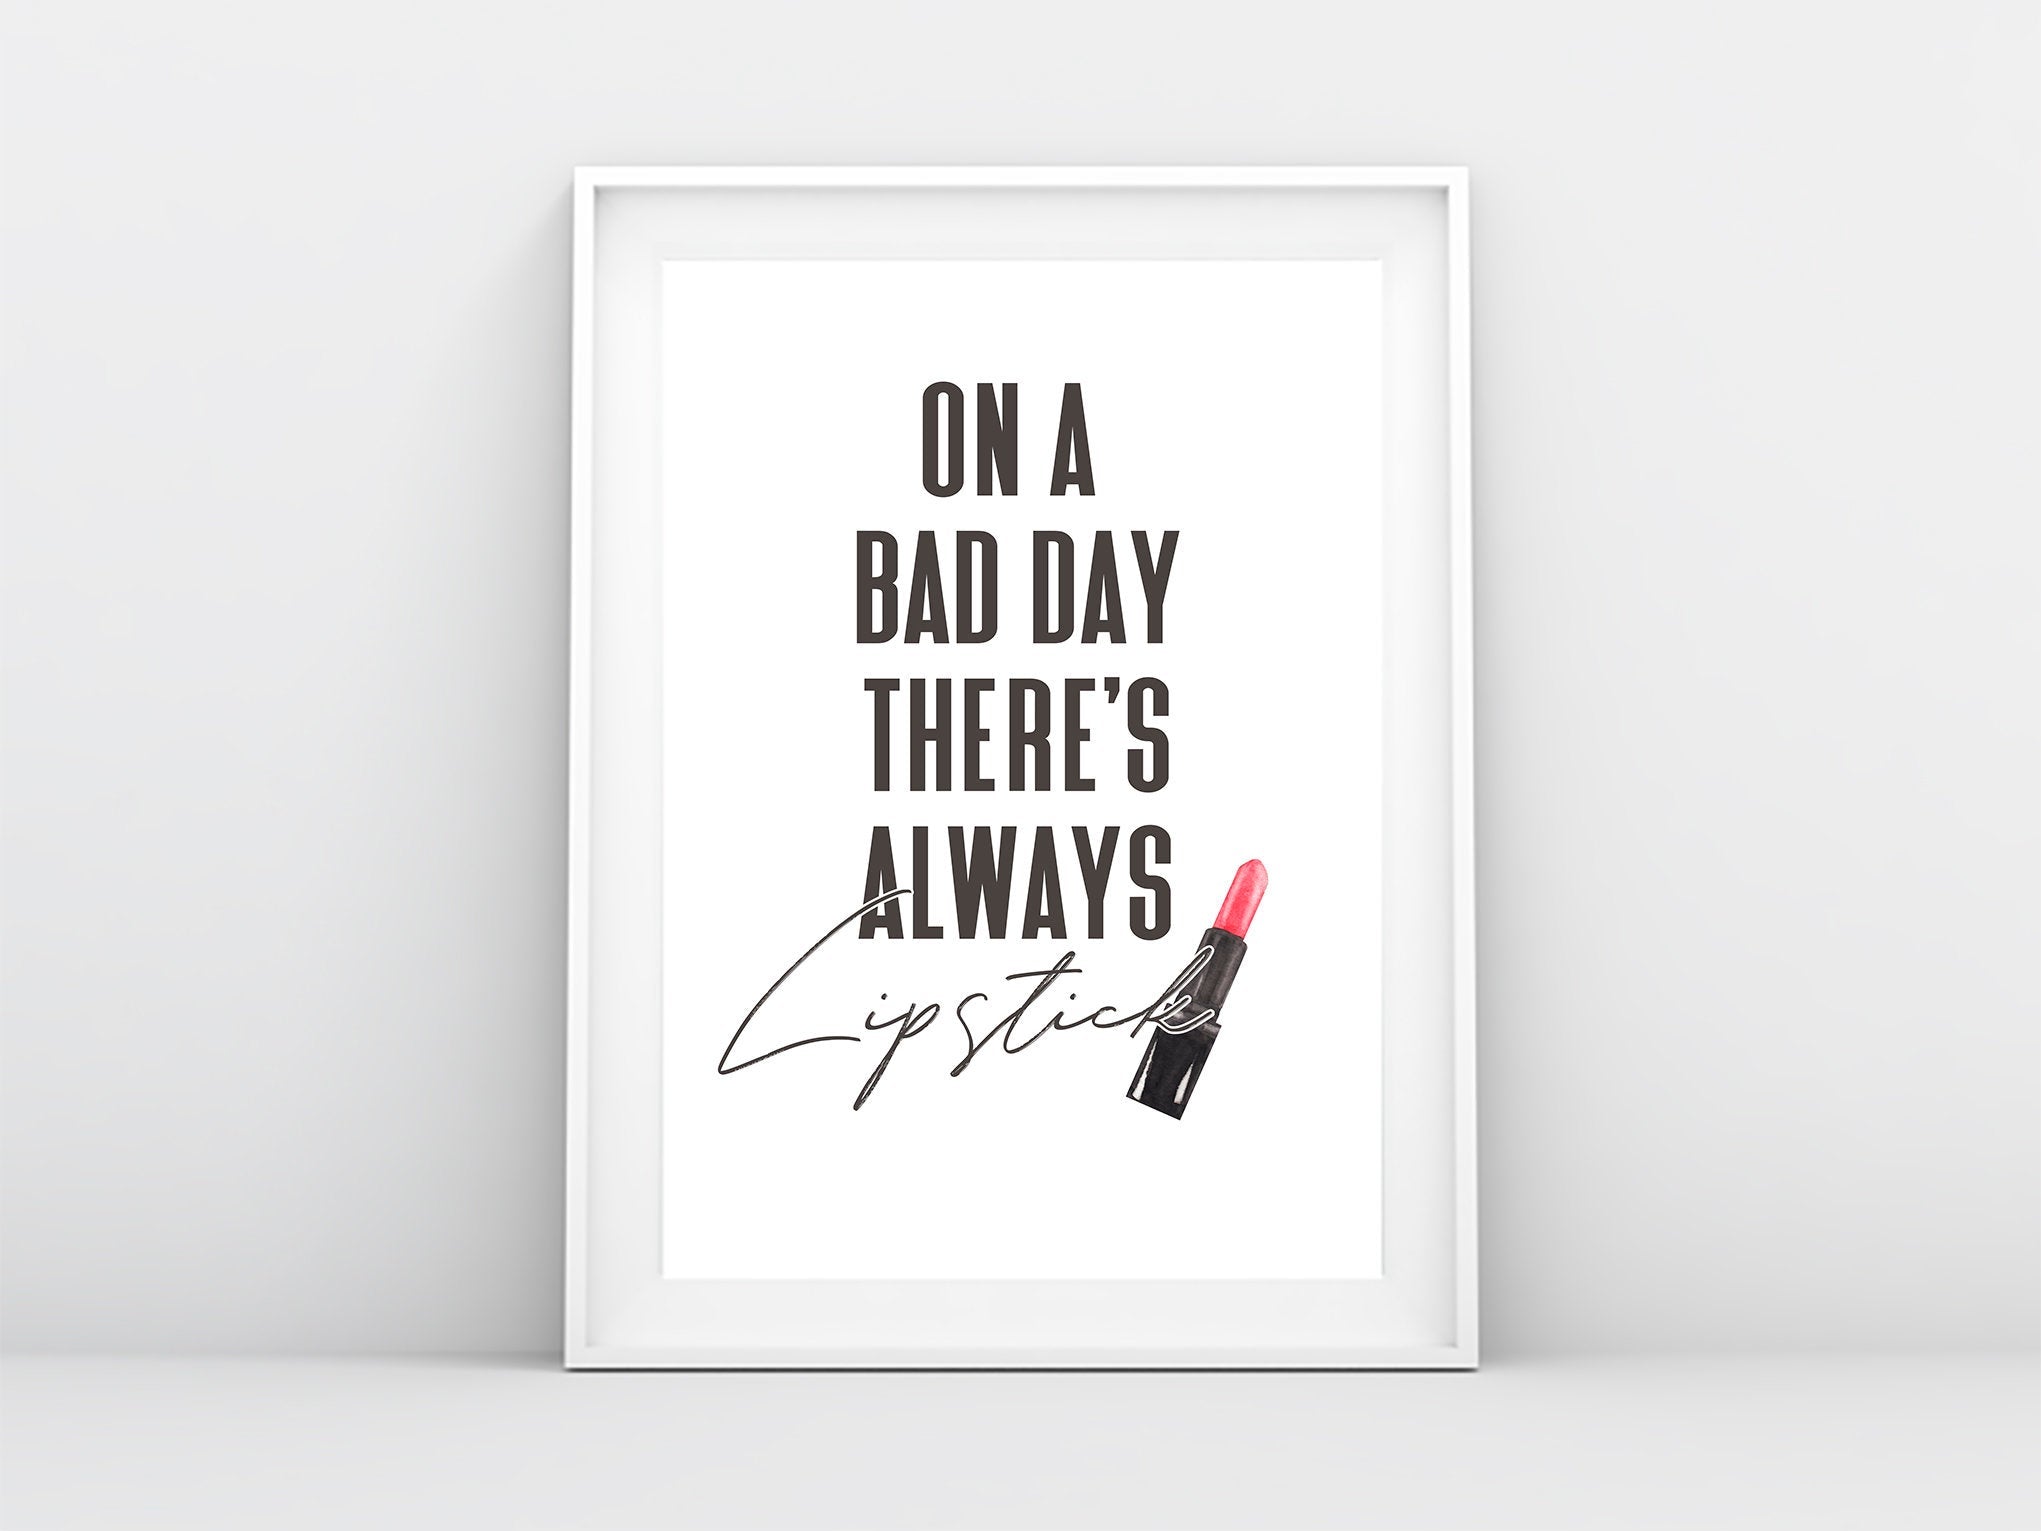 On a bad day there's always lipstick | Beauty quote print